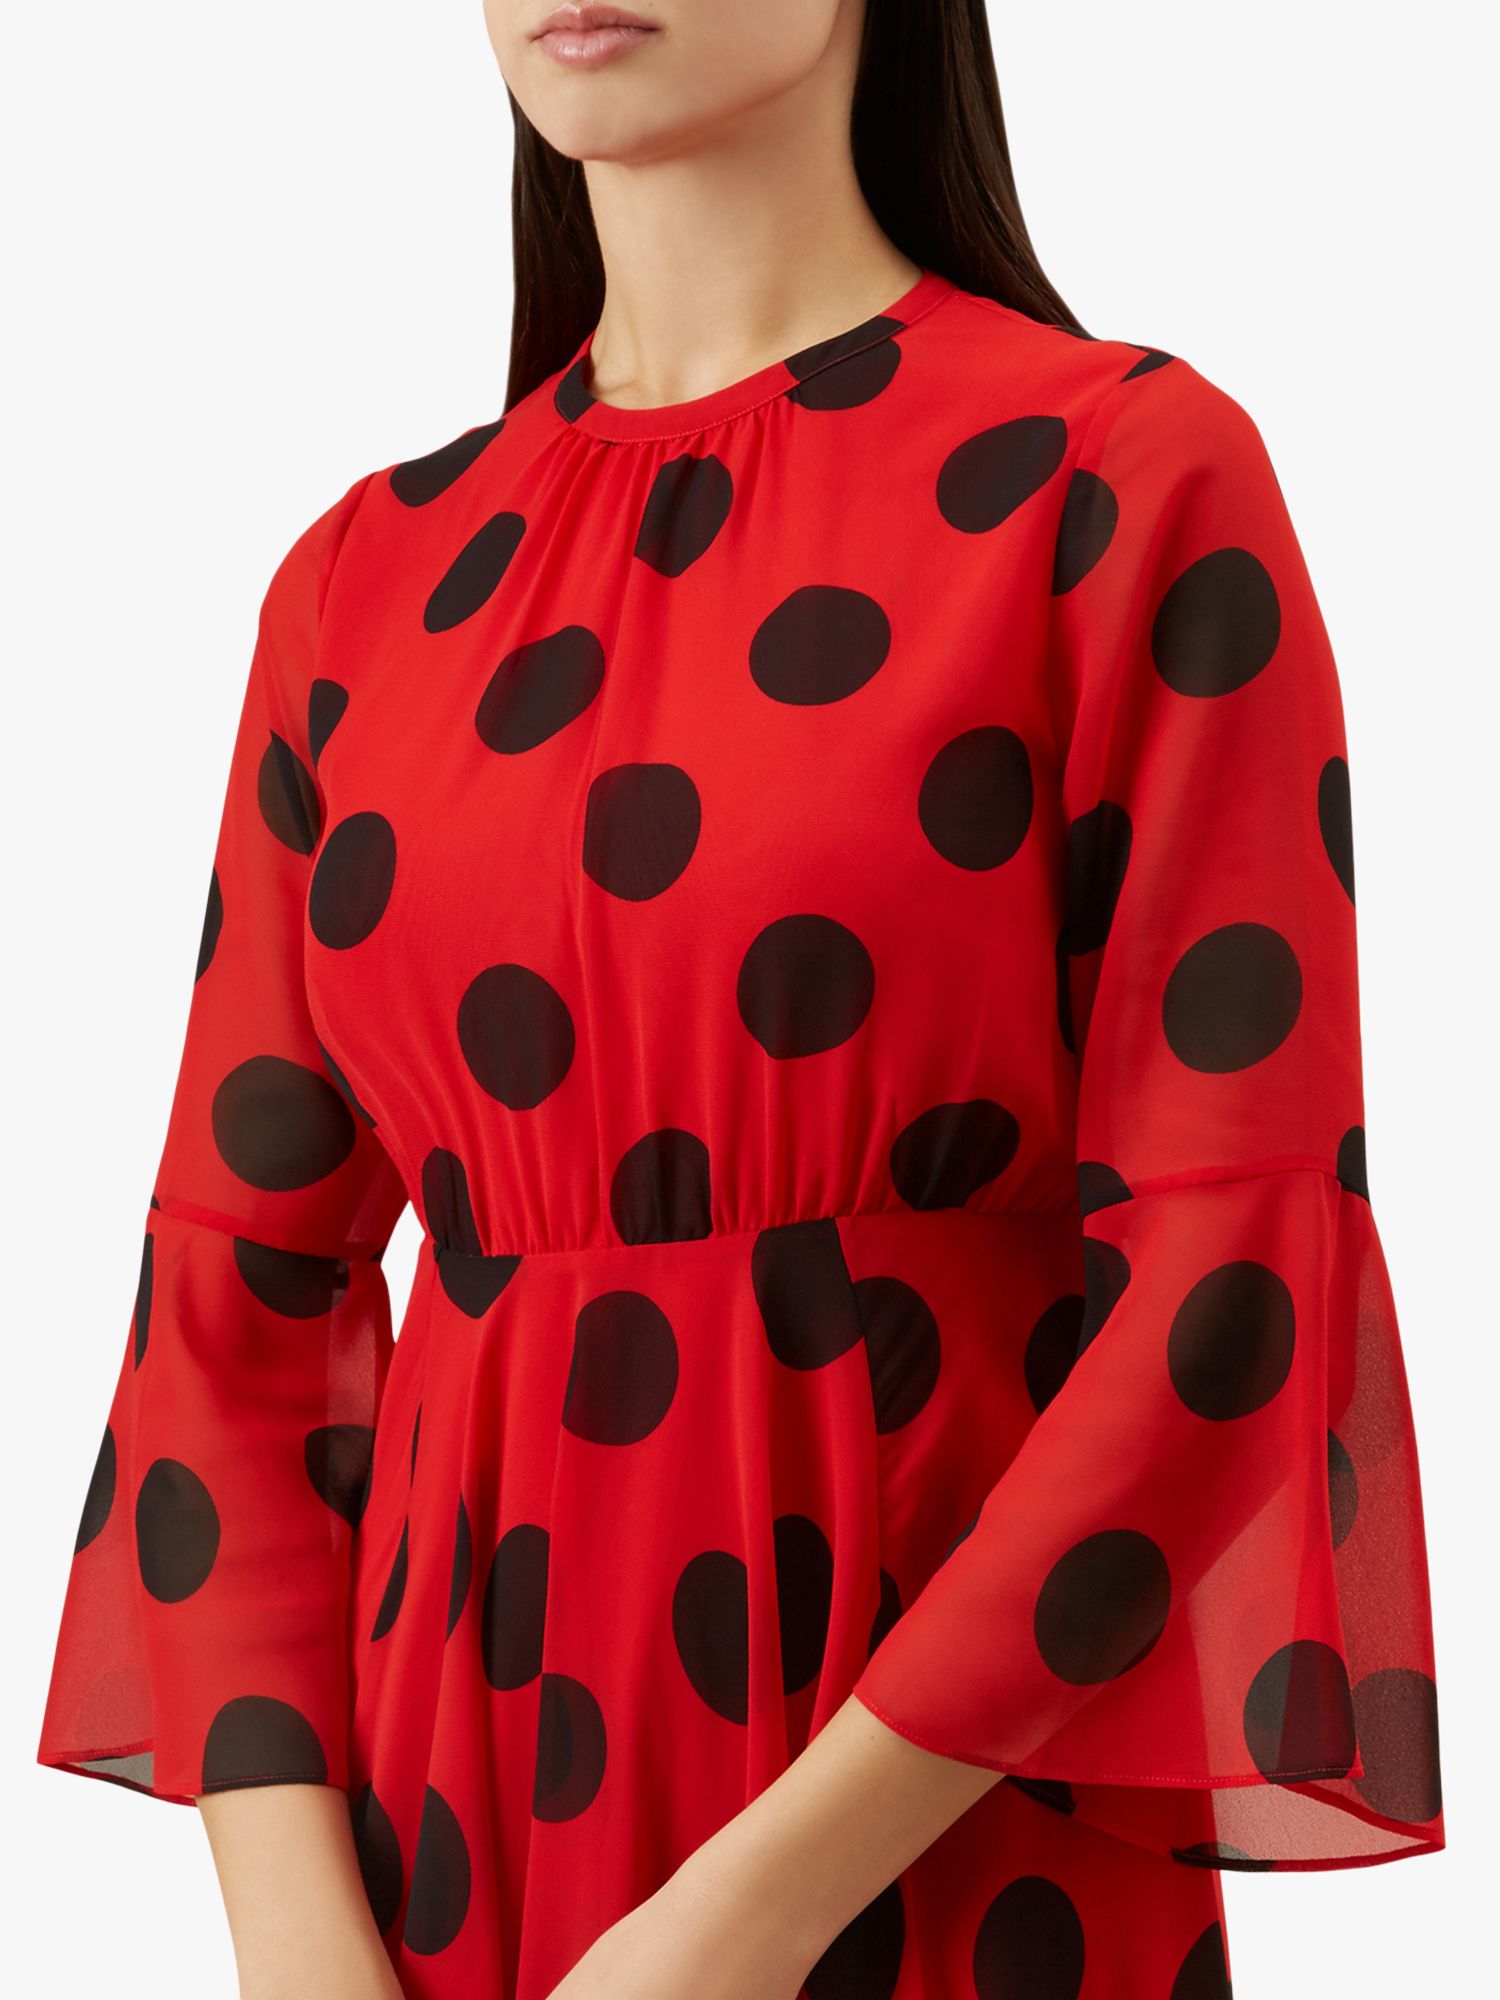 red dress with black dots